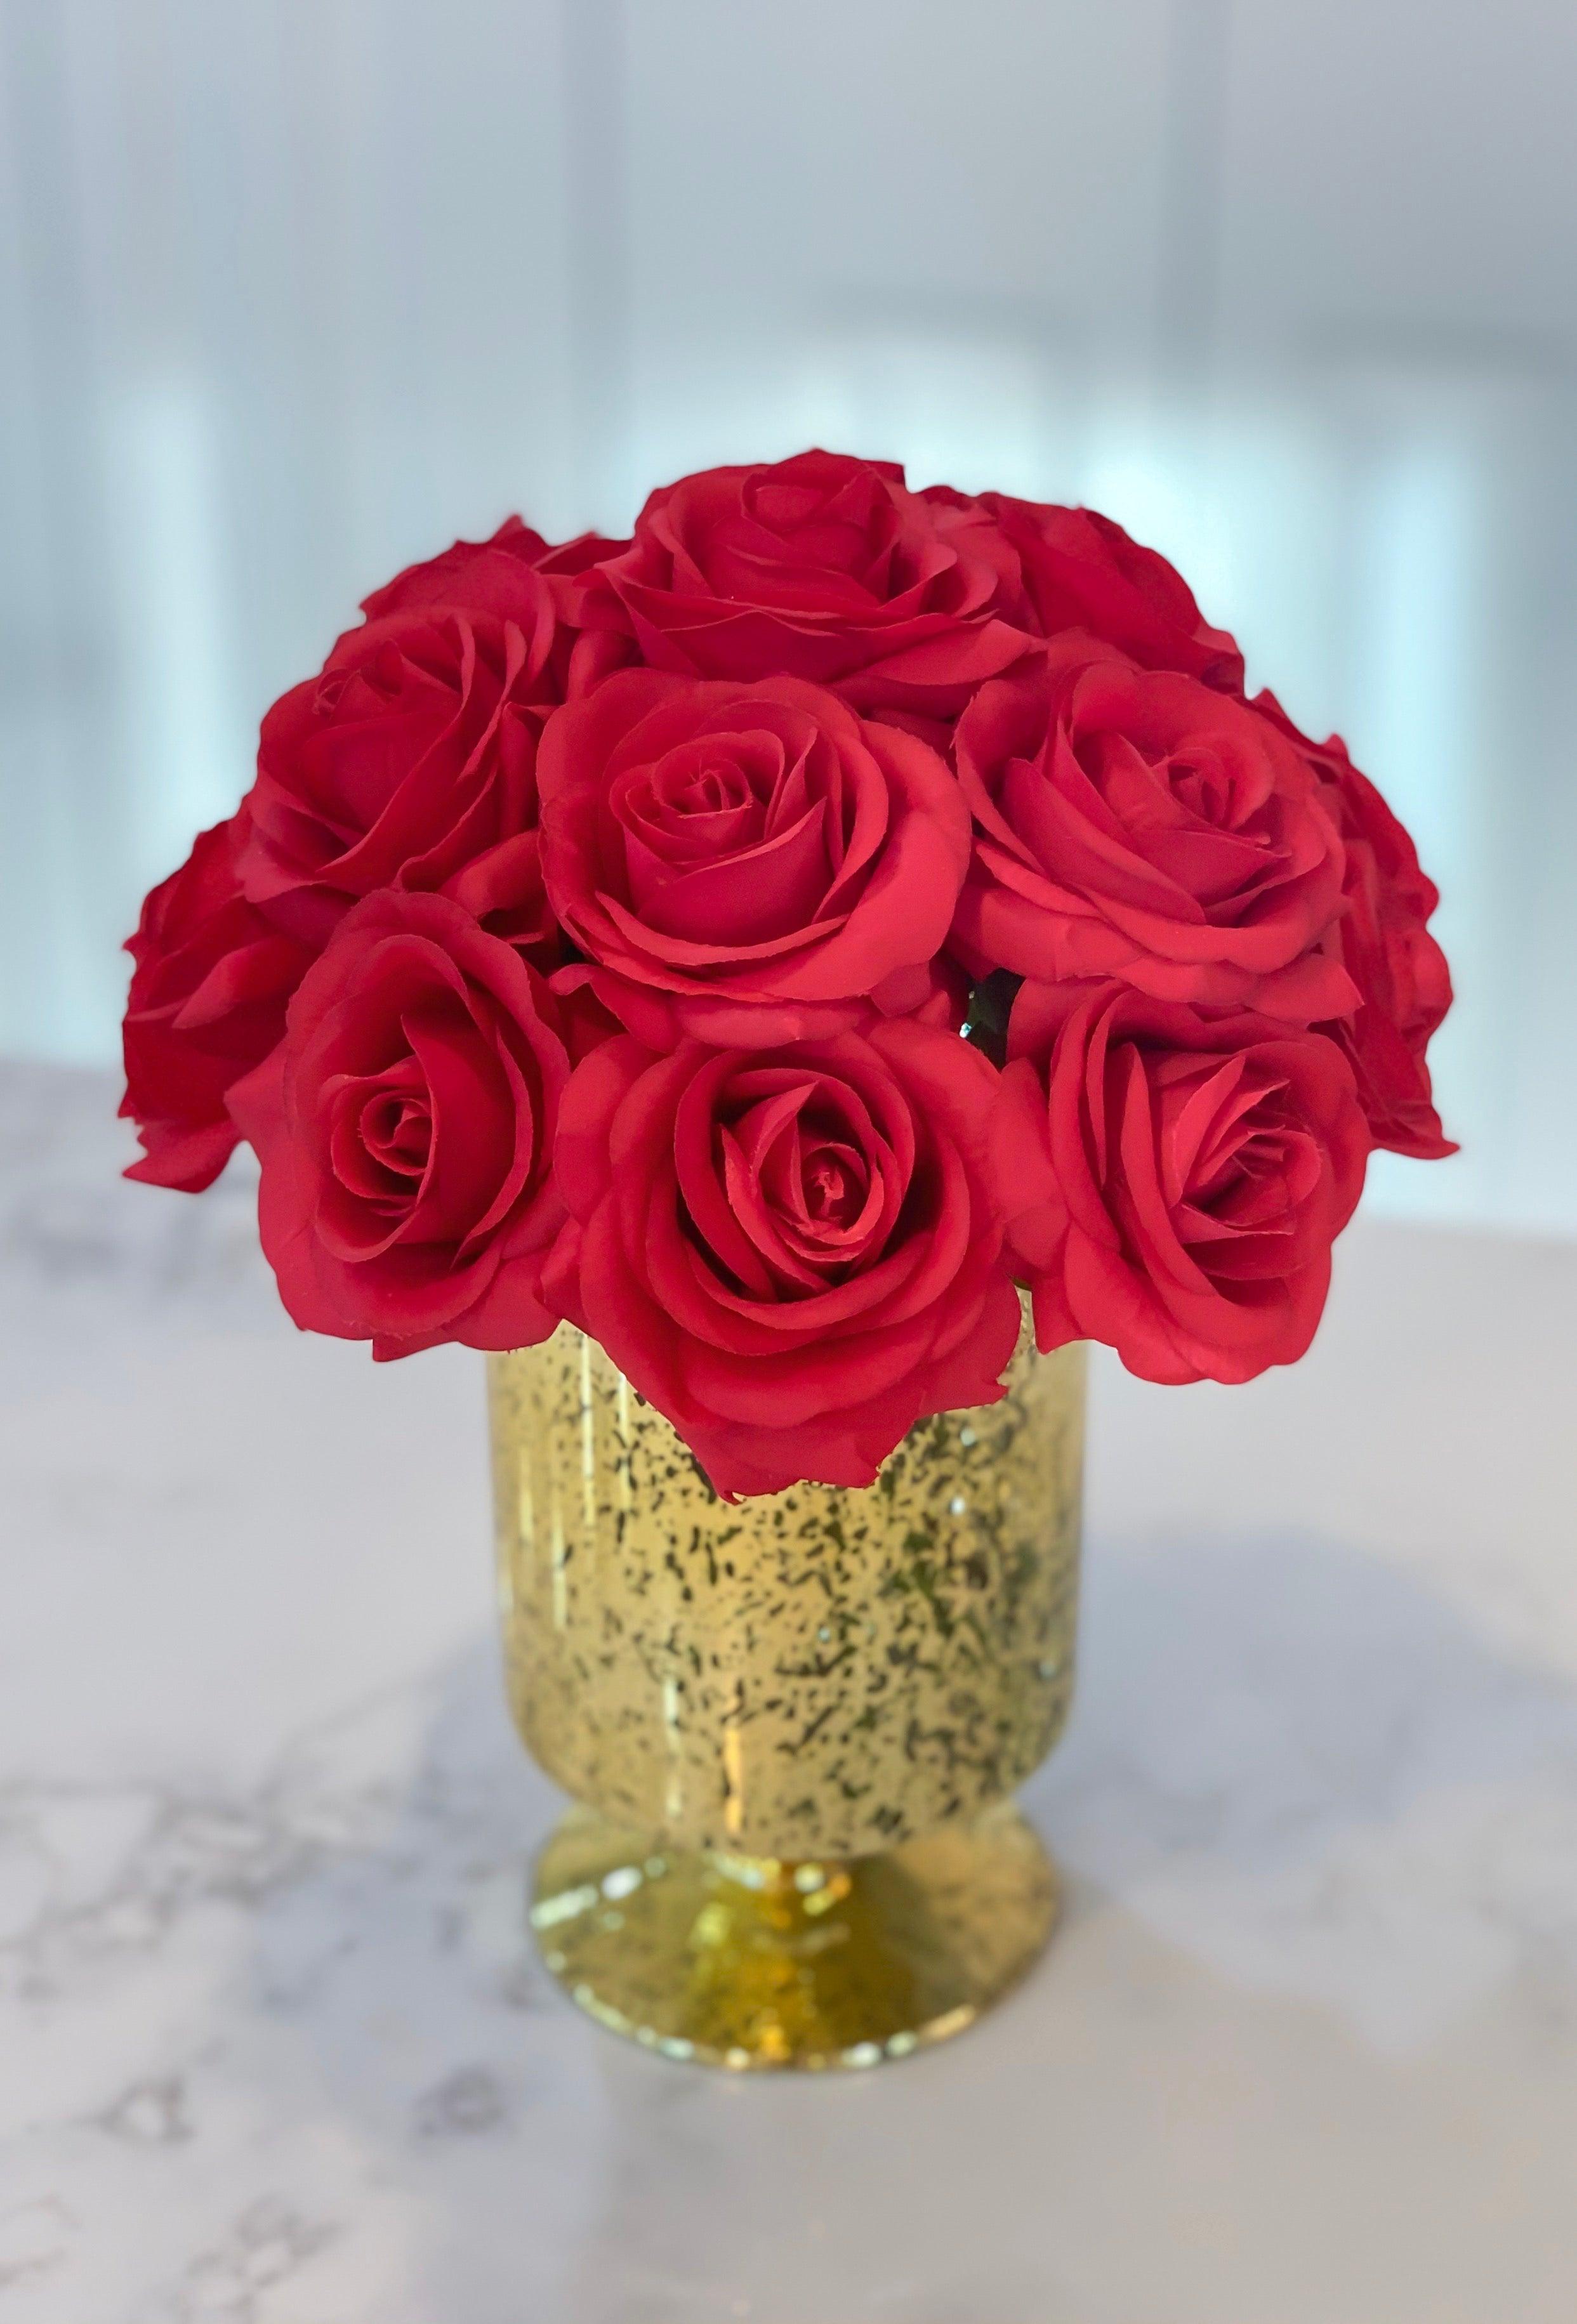 Deluxe Red Roses By Floraly - Send Fresher Flowers